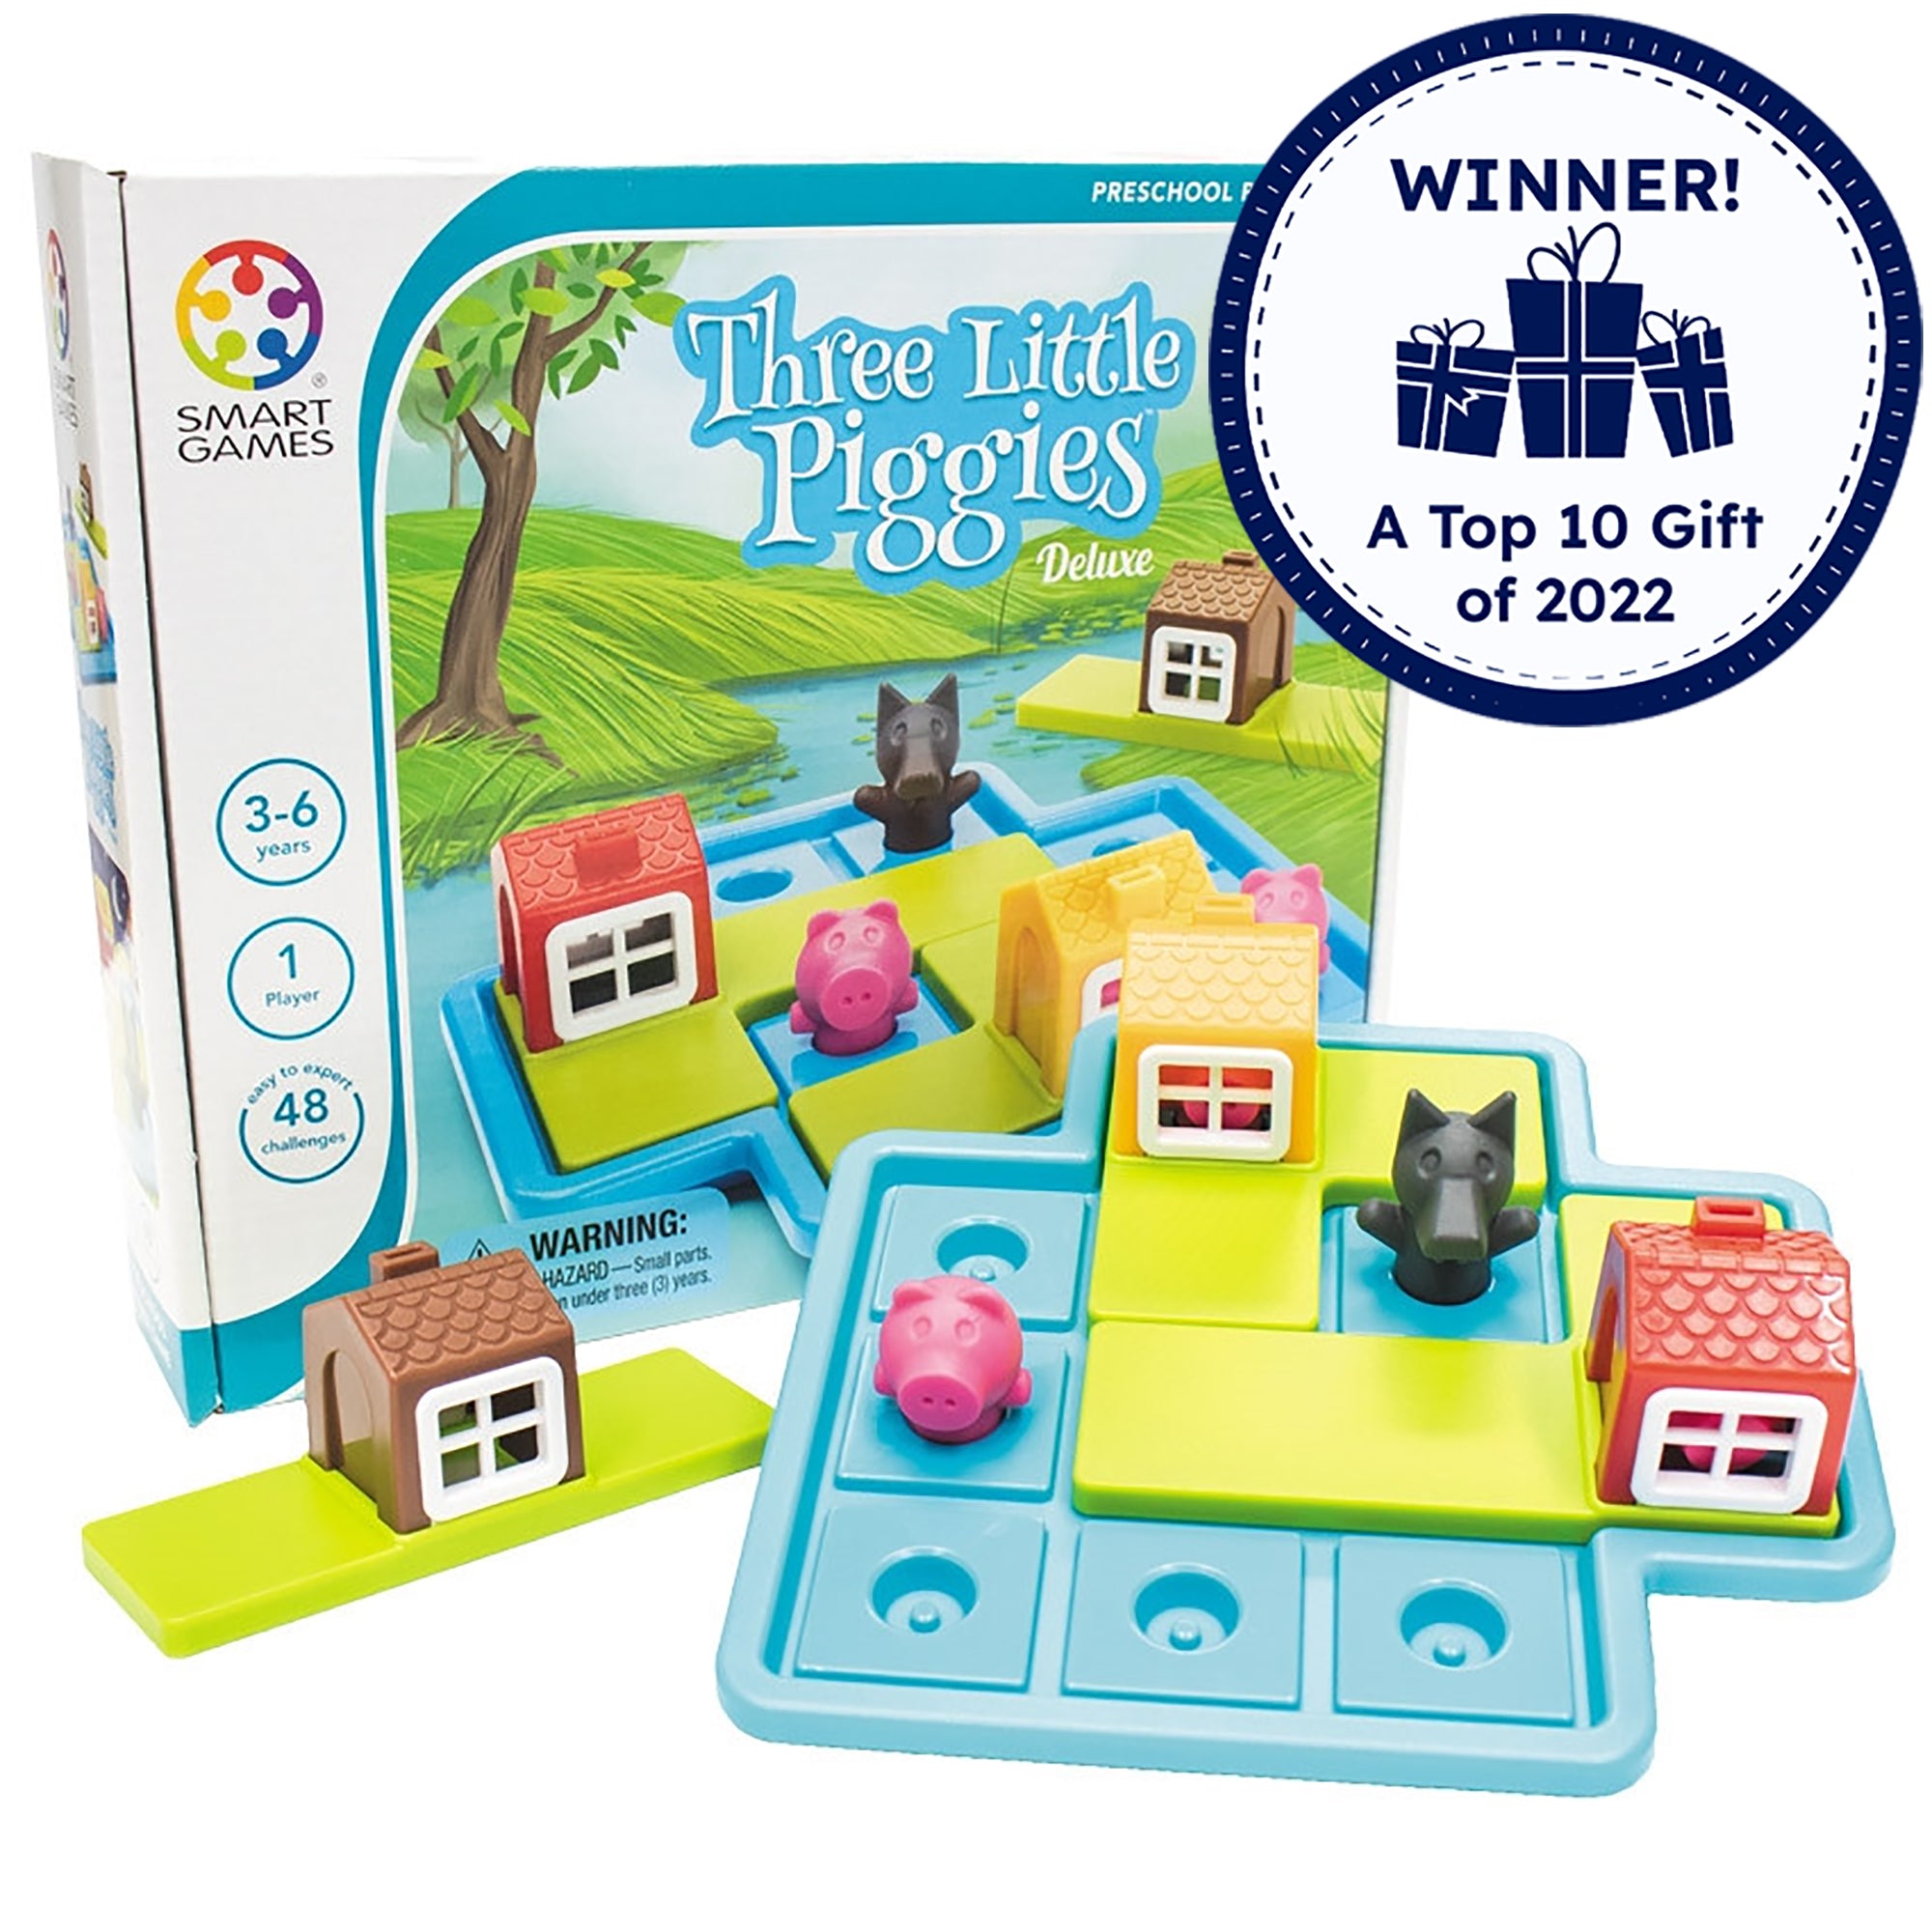 Three Little Piggies game box with the game setup in front of it. The game board is light blue with squares to put the playing pieces on. There are playing pieces on the board, including; a red house, a yellow house, 3 pigs, and a wolf. Off to the left side is a brown house piece. There is a badge reading “Winner! A top 10 gift of 2022” in the top-right of the picture.